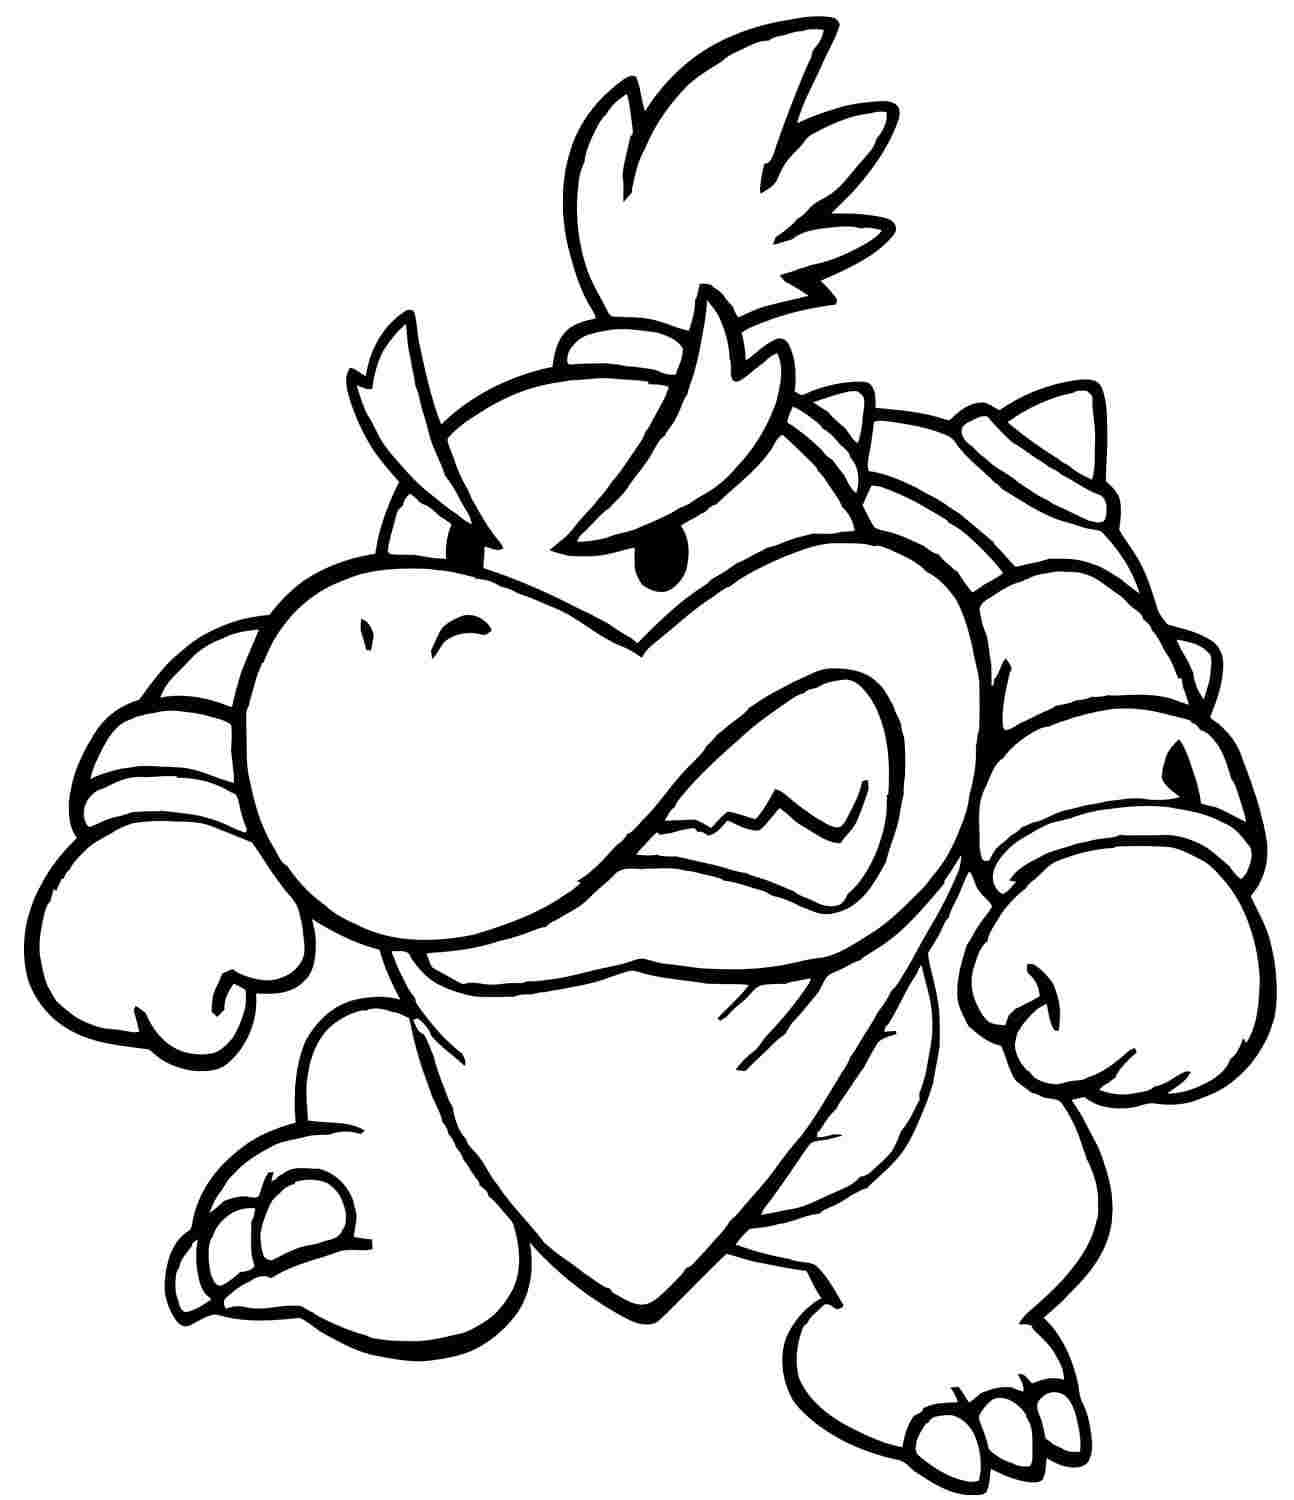 Baby Bowser steps on me Coloring Page